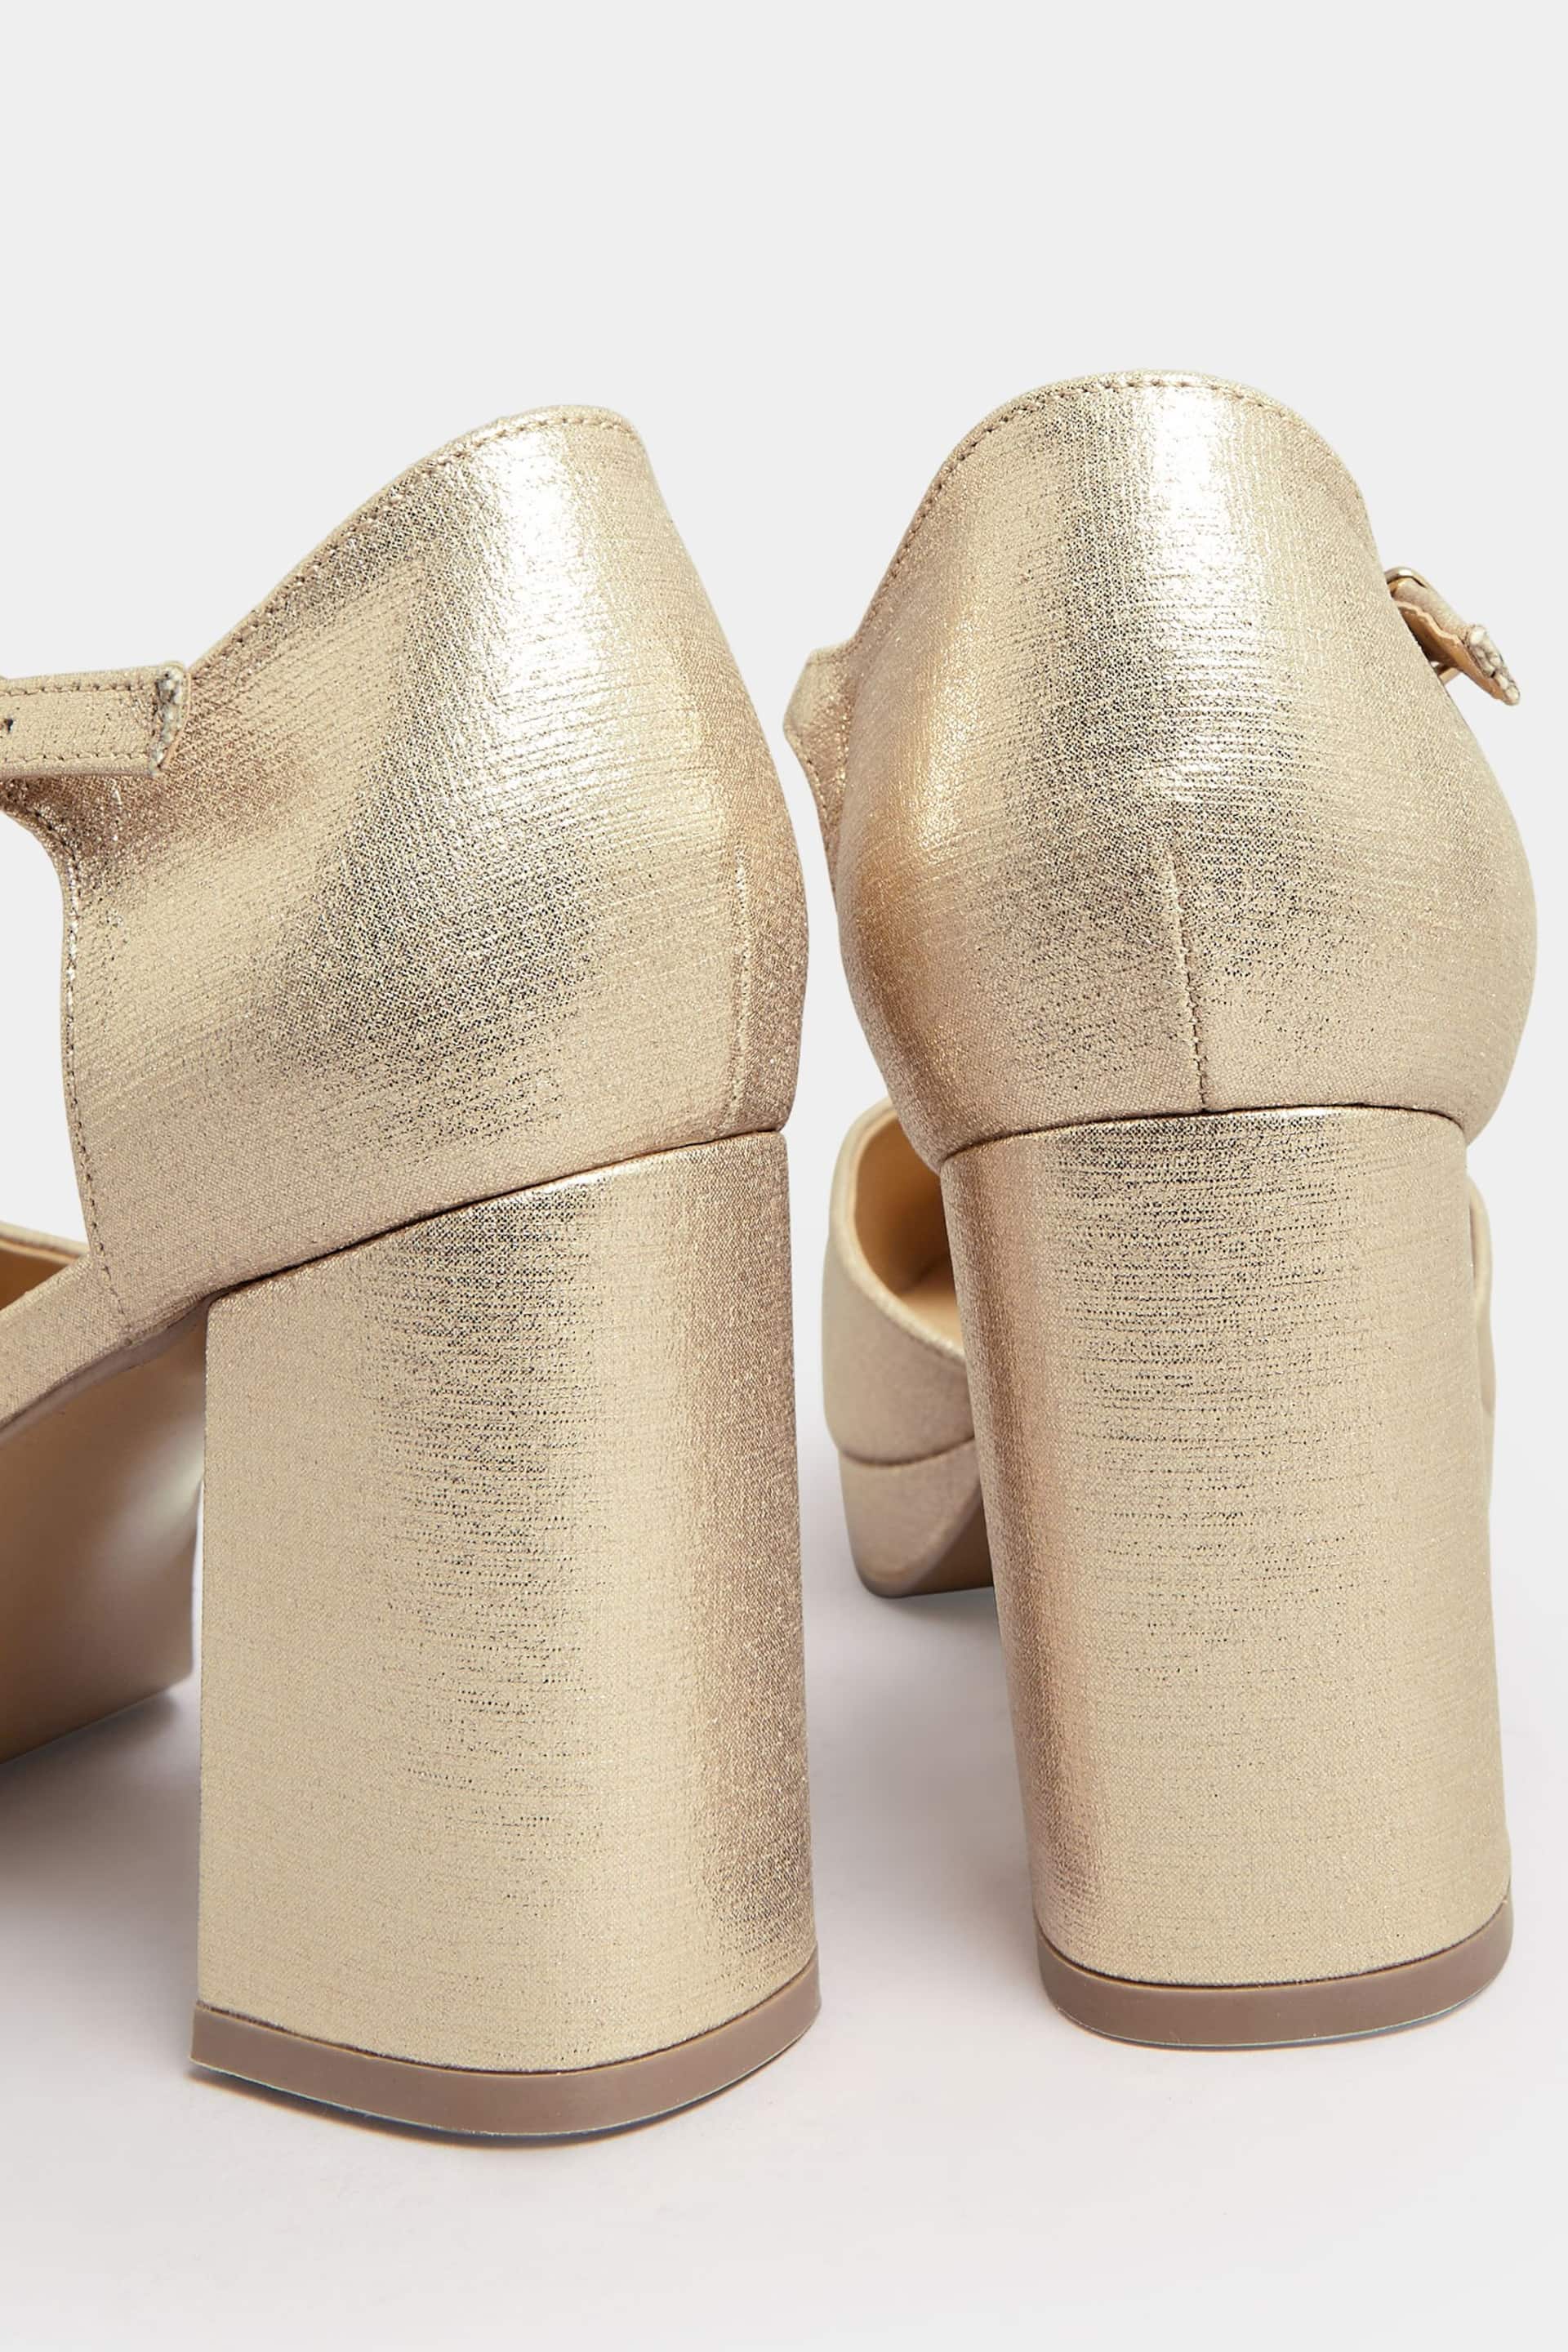 Yours Curve Gold Extra-Wide Fit Platform Court Shoes - Image 3 of 4